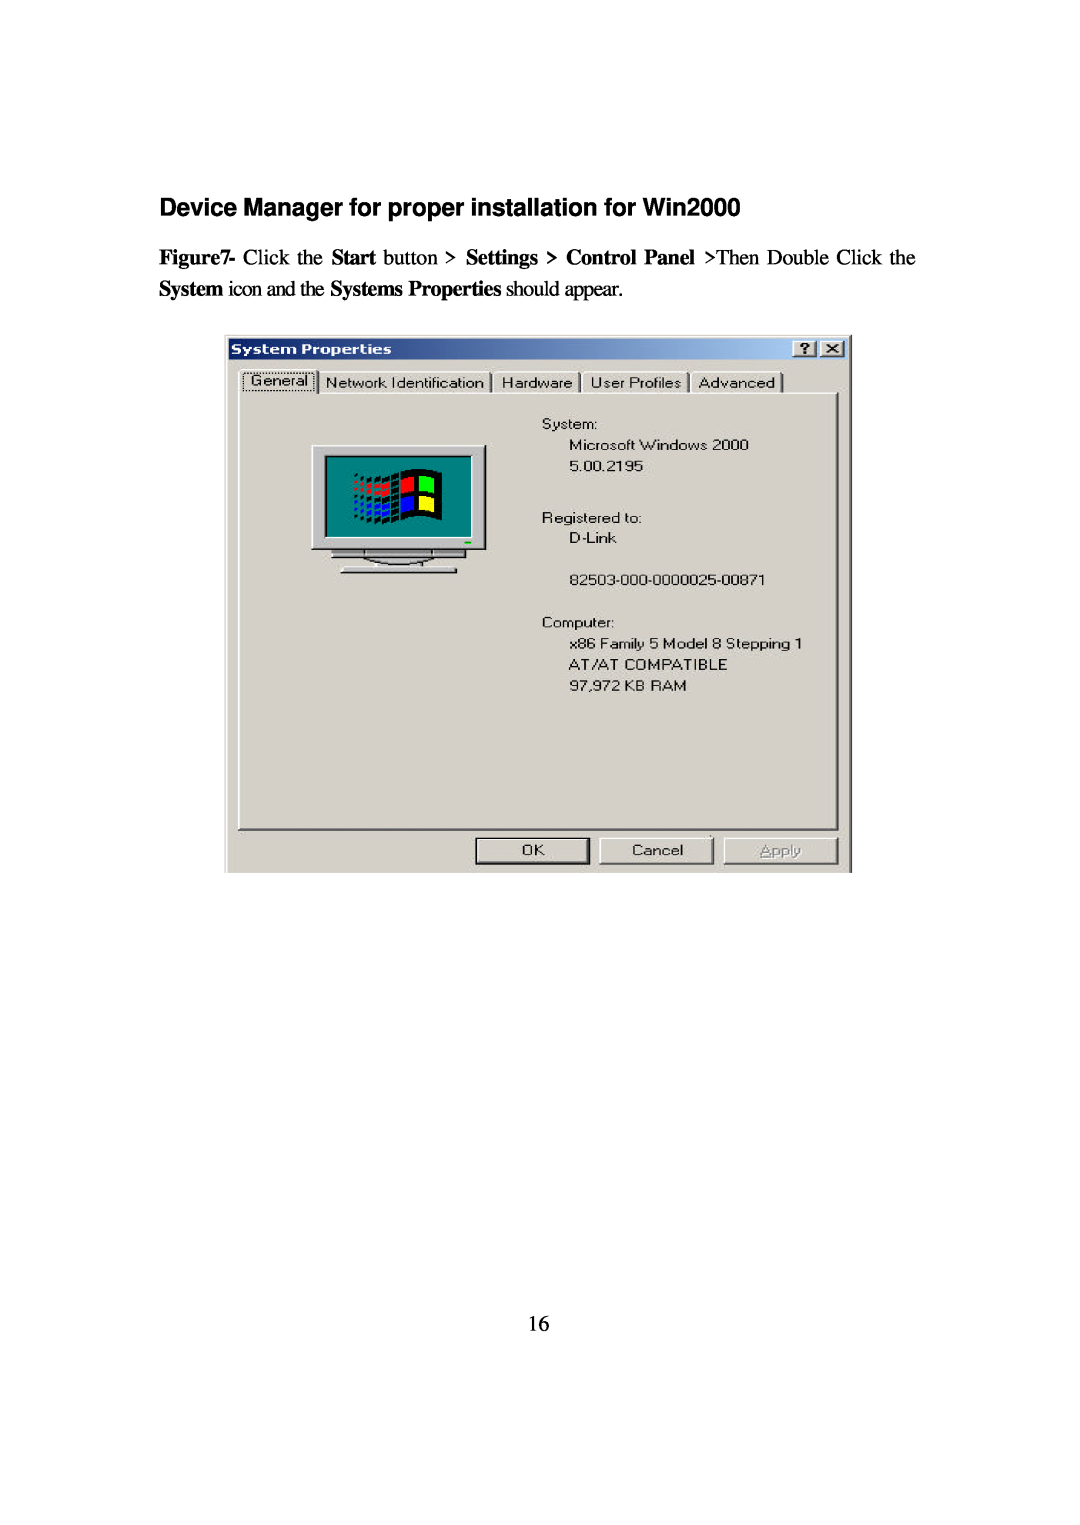 D-Link DFE-680TXD Device Manager for proper installation for Win2000, System icon and the Systems Properties should appear 